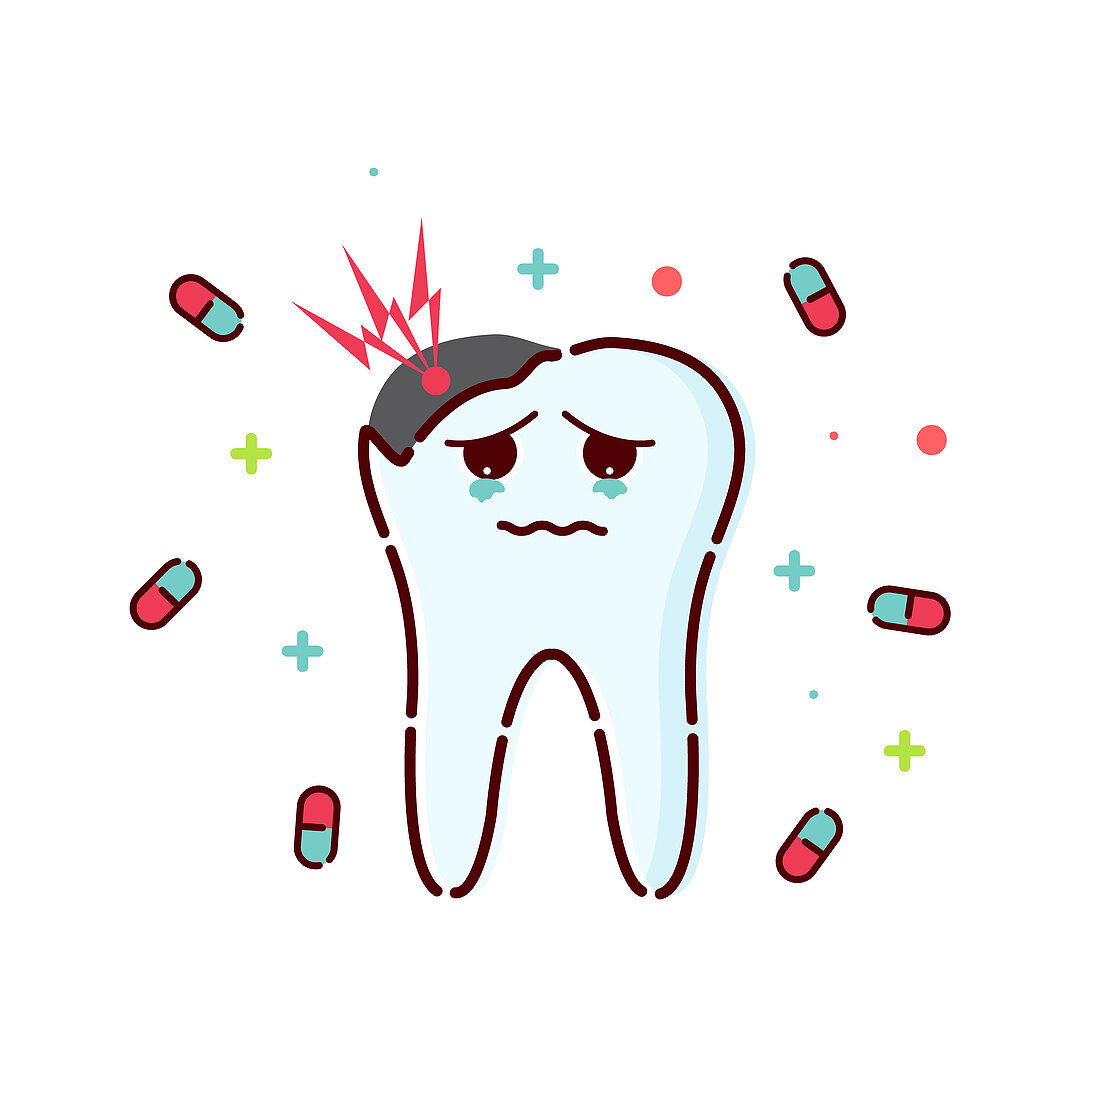 Tooth caries, conceptual illustration